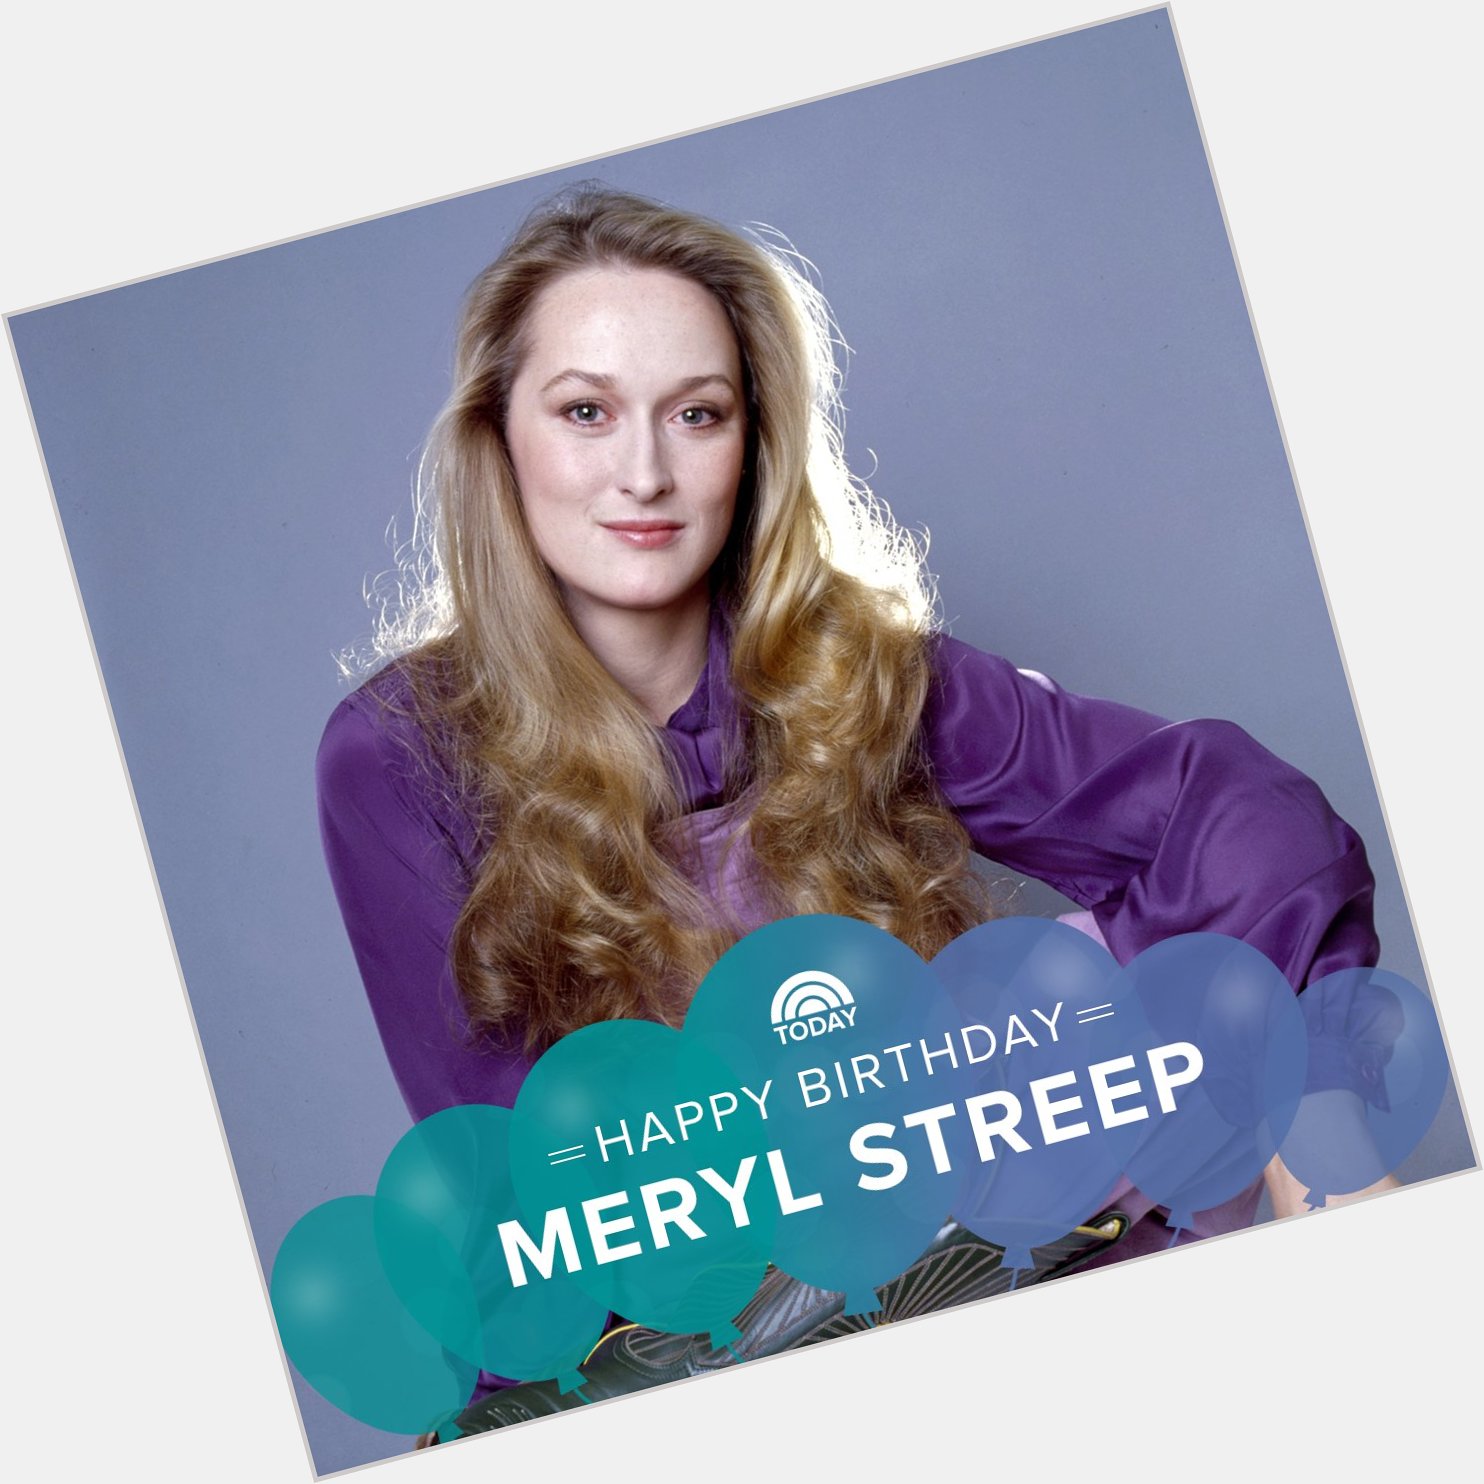 Happy 69th birthday to the woman who proves age is just a number, Meryl Streep! 